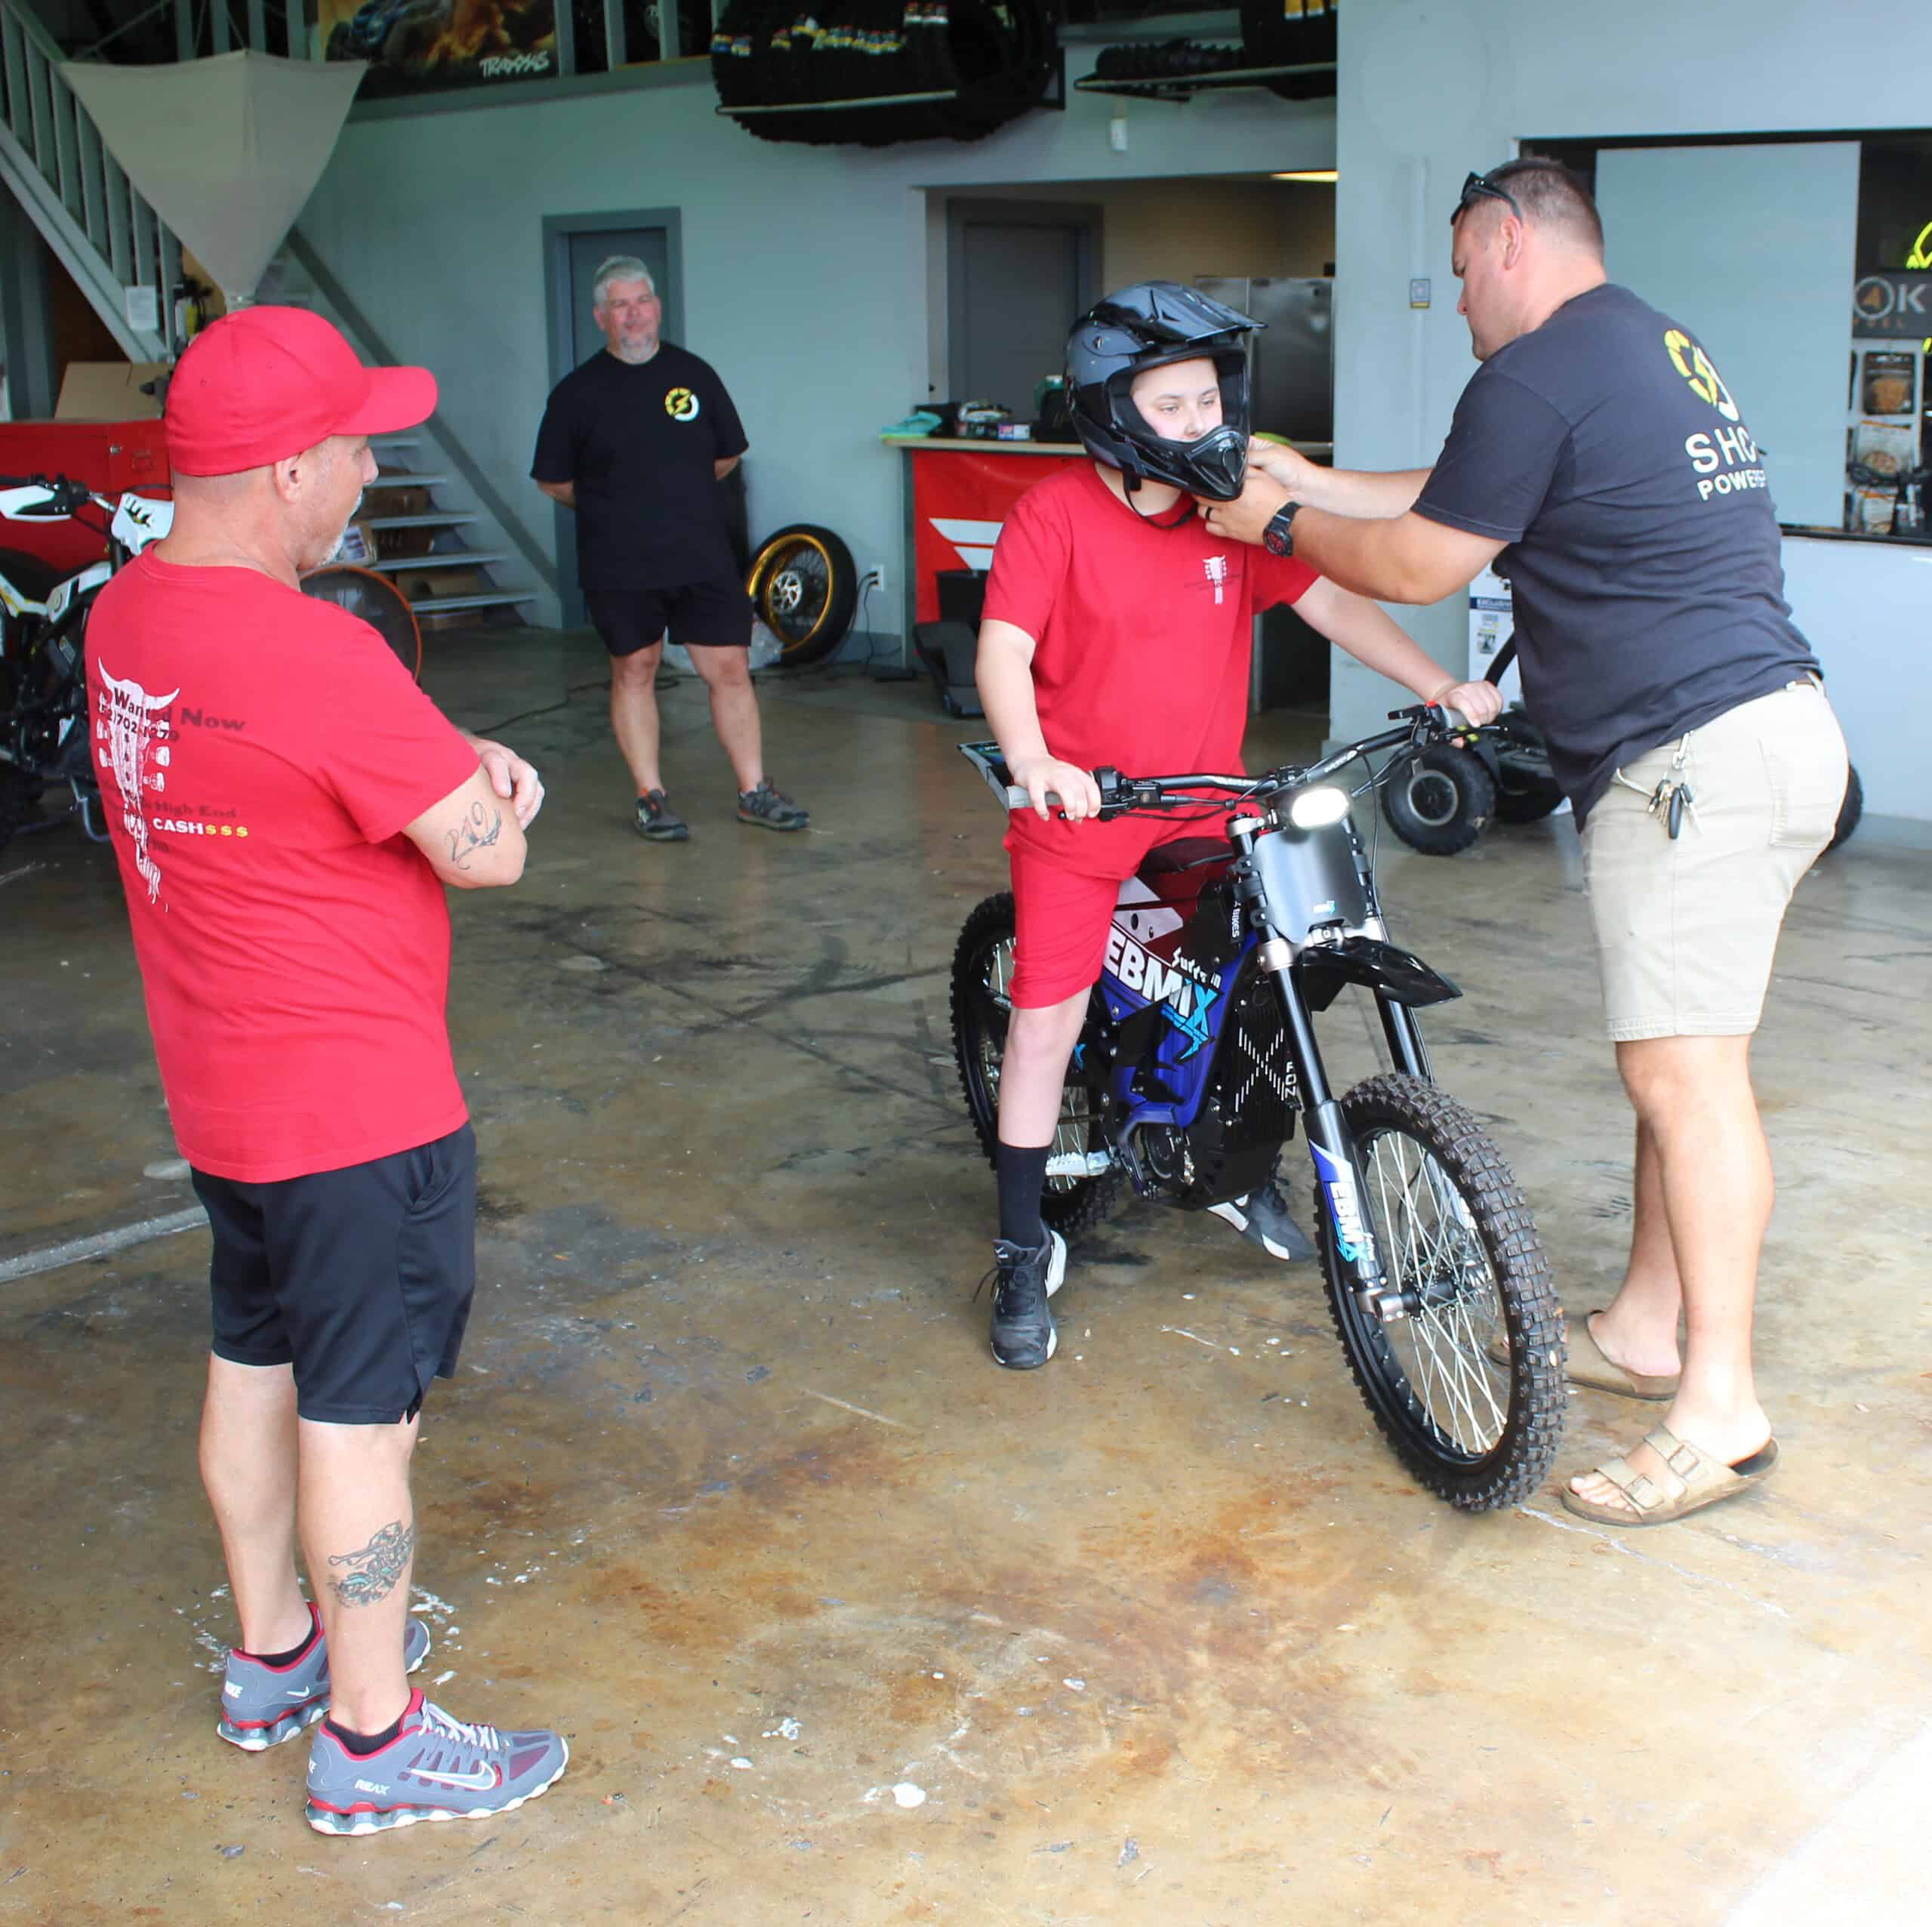 Aaron Nations (right) adjusts Deegan's helmet as he prepares to take his new electric motorbike out for a spin. His father, Anthony Giglio (far left) looks on. [Photo by Austyn Szempruch]